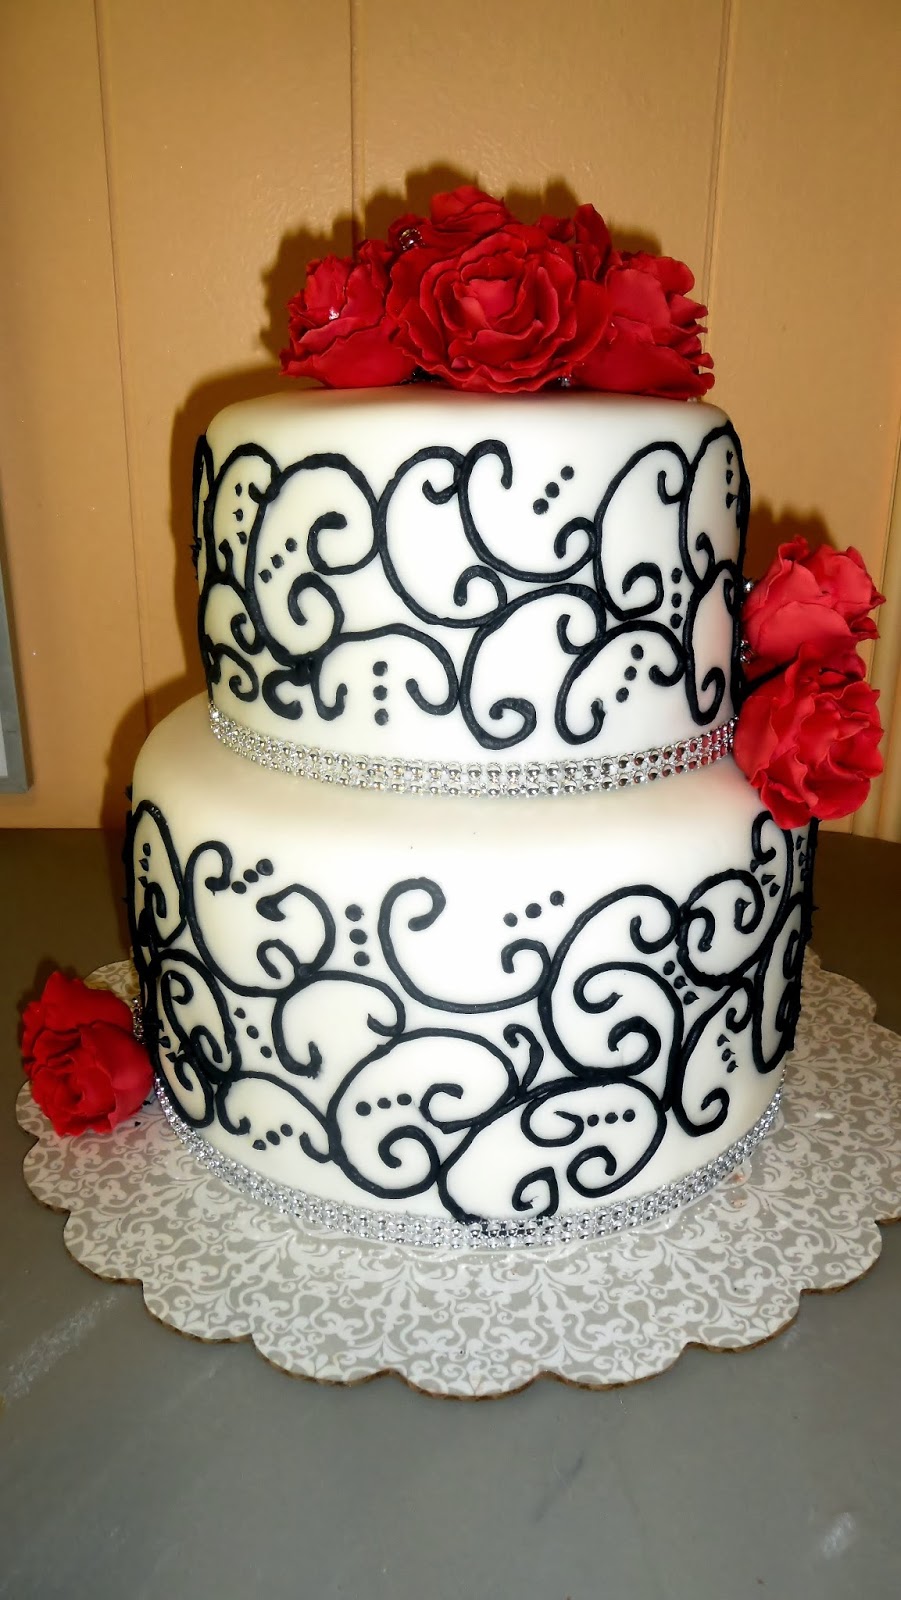 Frosted Dreams Cakes and More | 226 Sunset Dr N, Asheboro, NC 27205 | Phone: (336) 653-5648